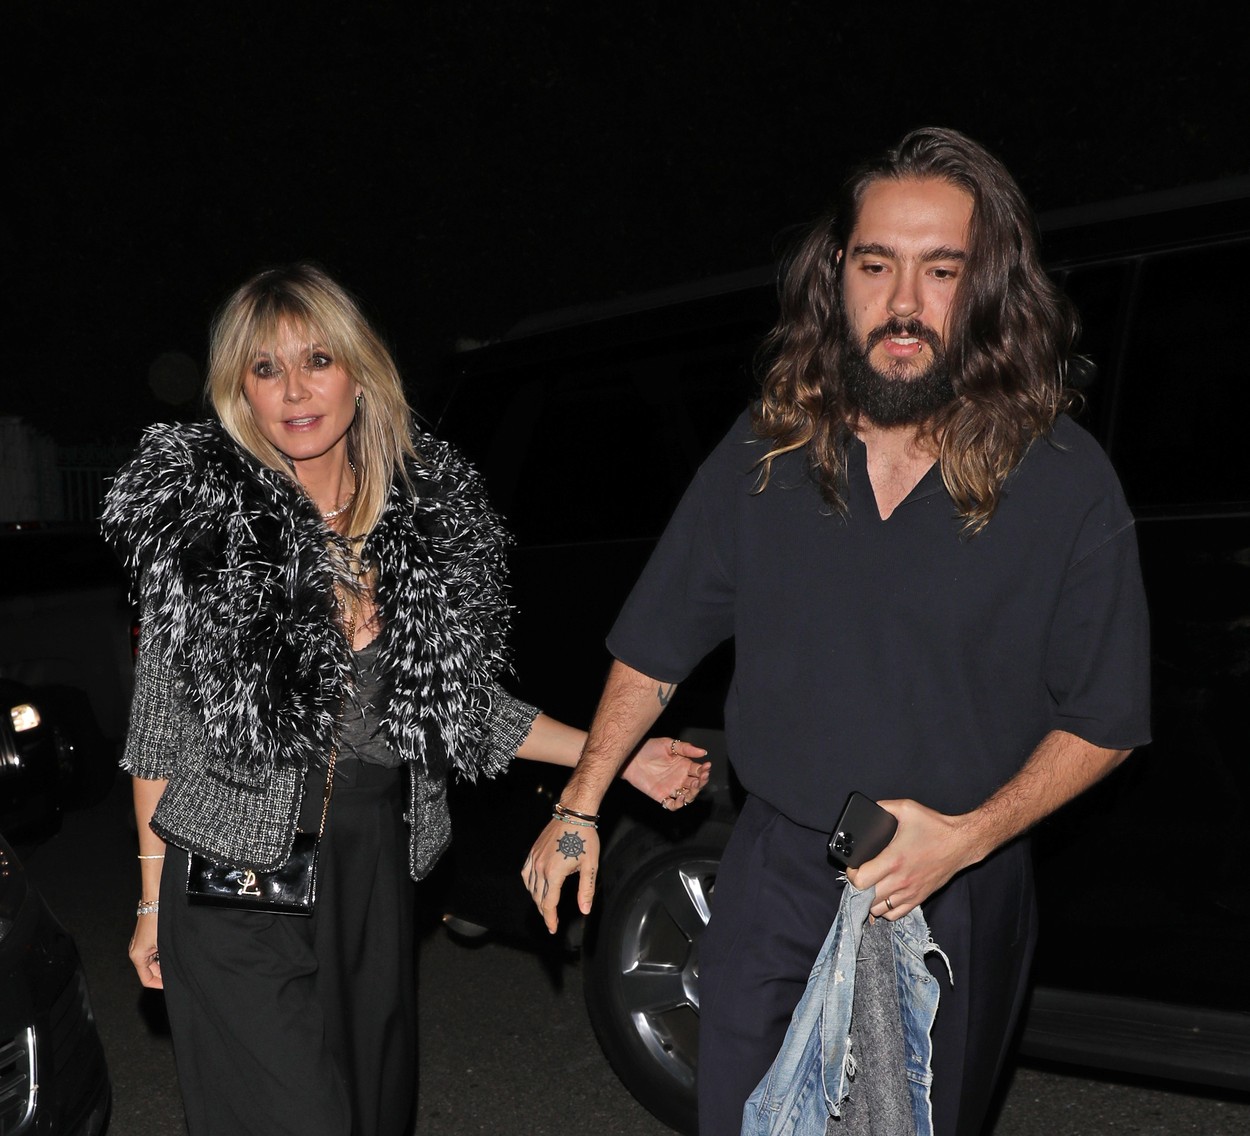 EXCLUSIVE: Heidi Klum and Tom Kaulitz walk hand in hand as they attend Paris Hilton's 39th birthday party in Los Angeles.
21 Feb 2020, Image: 500076287, License: Rights-managed, Restrictions: World Rights, Model Release: no, Credit line: iamKevinWong/Photog Group/MEGA / The Mega Agency / Profimedia